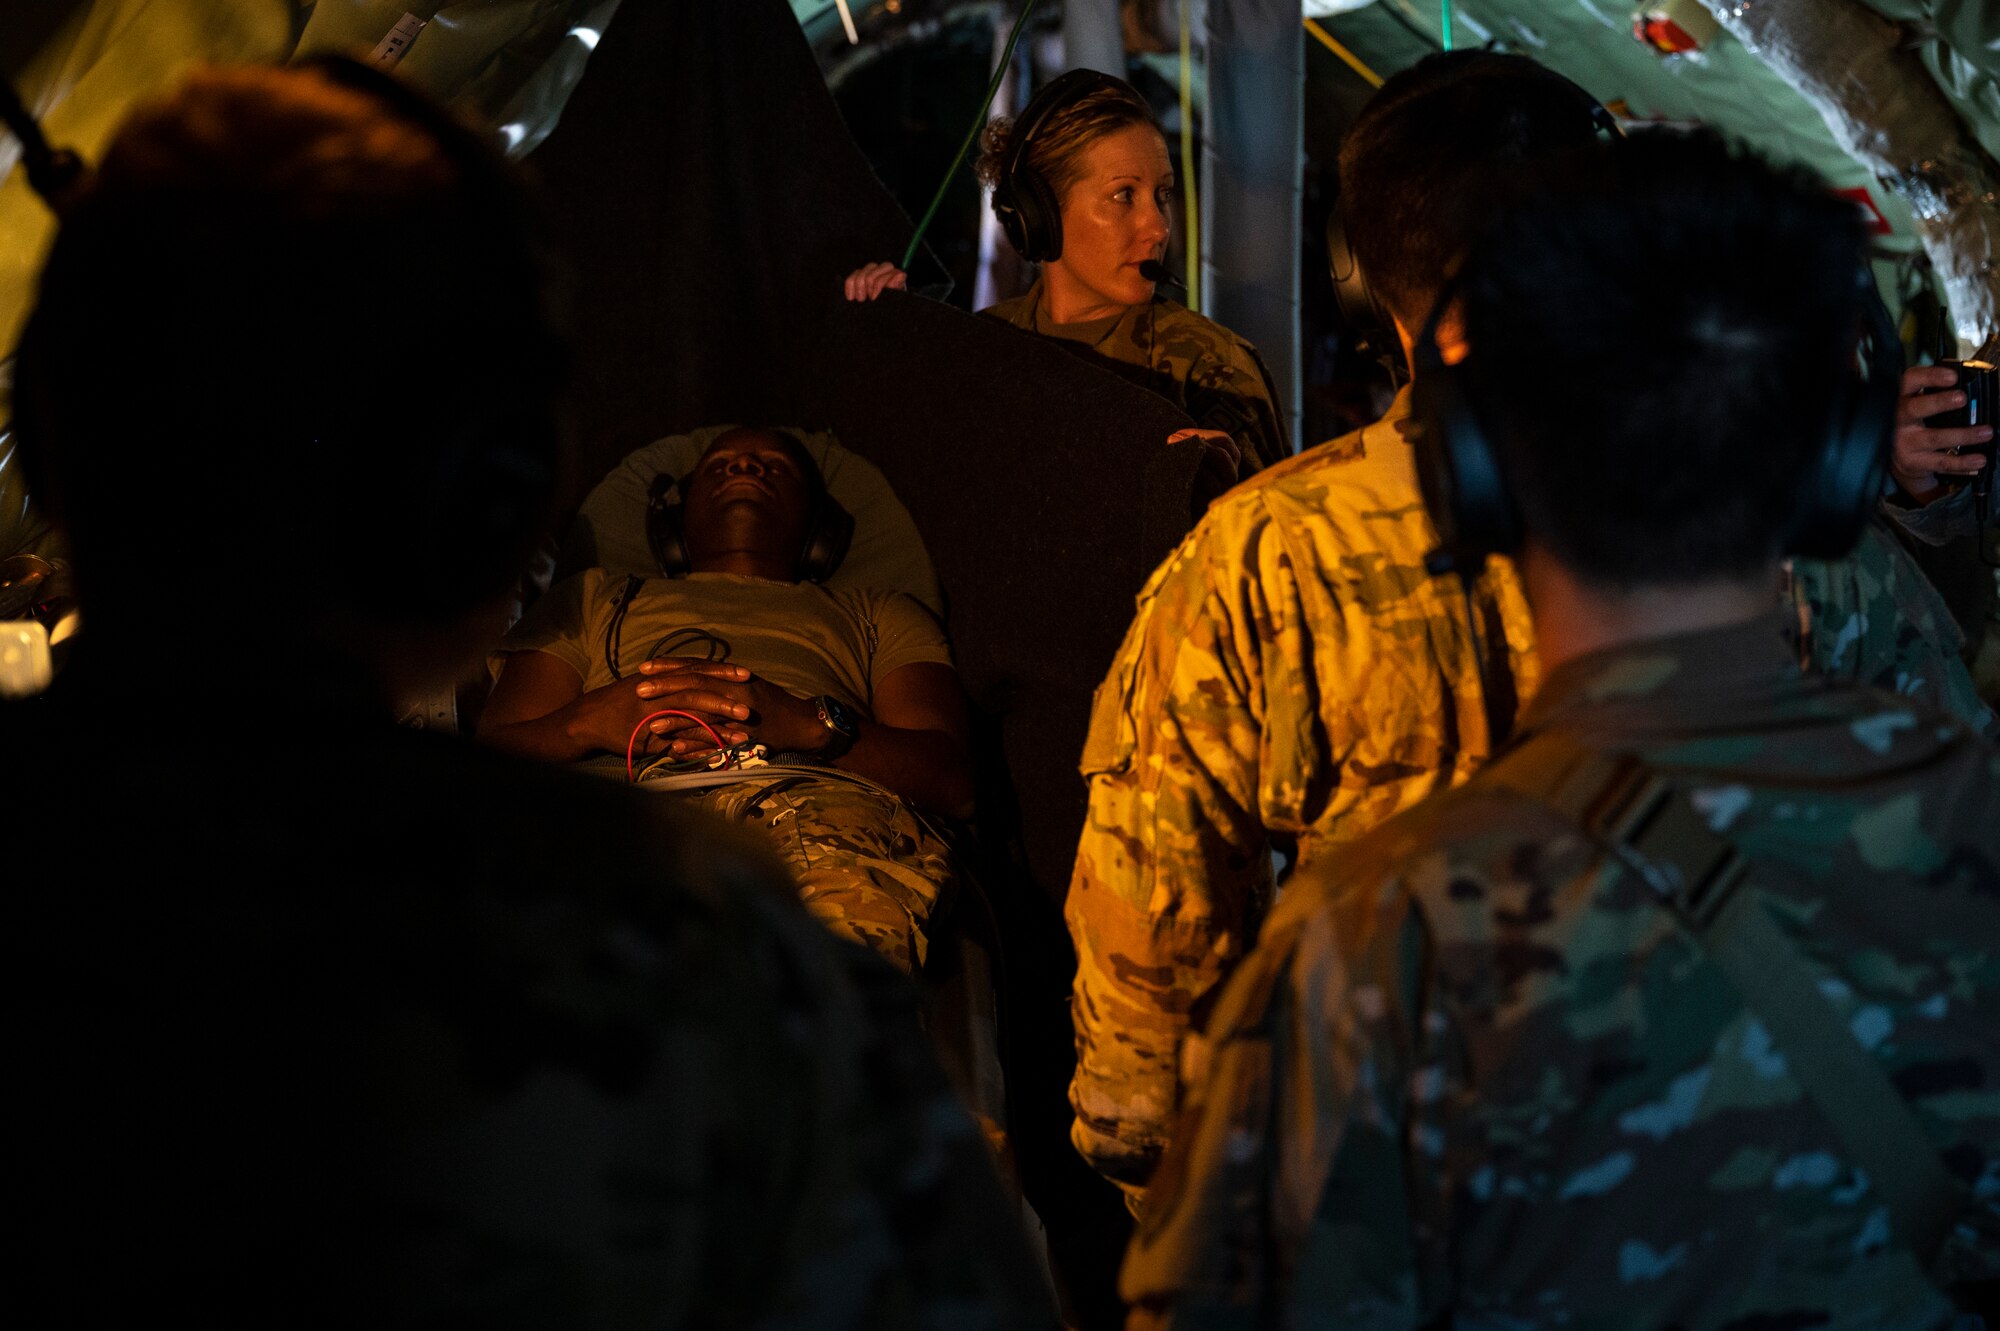 A group of Airmen gather around a patient